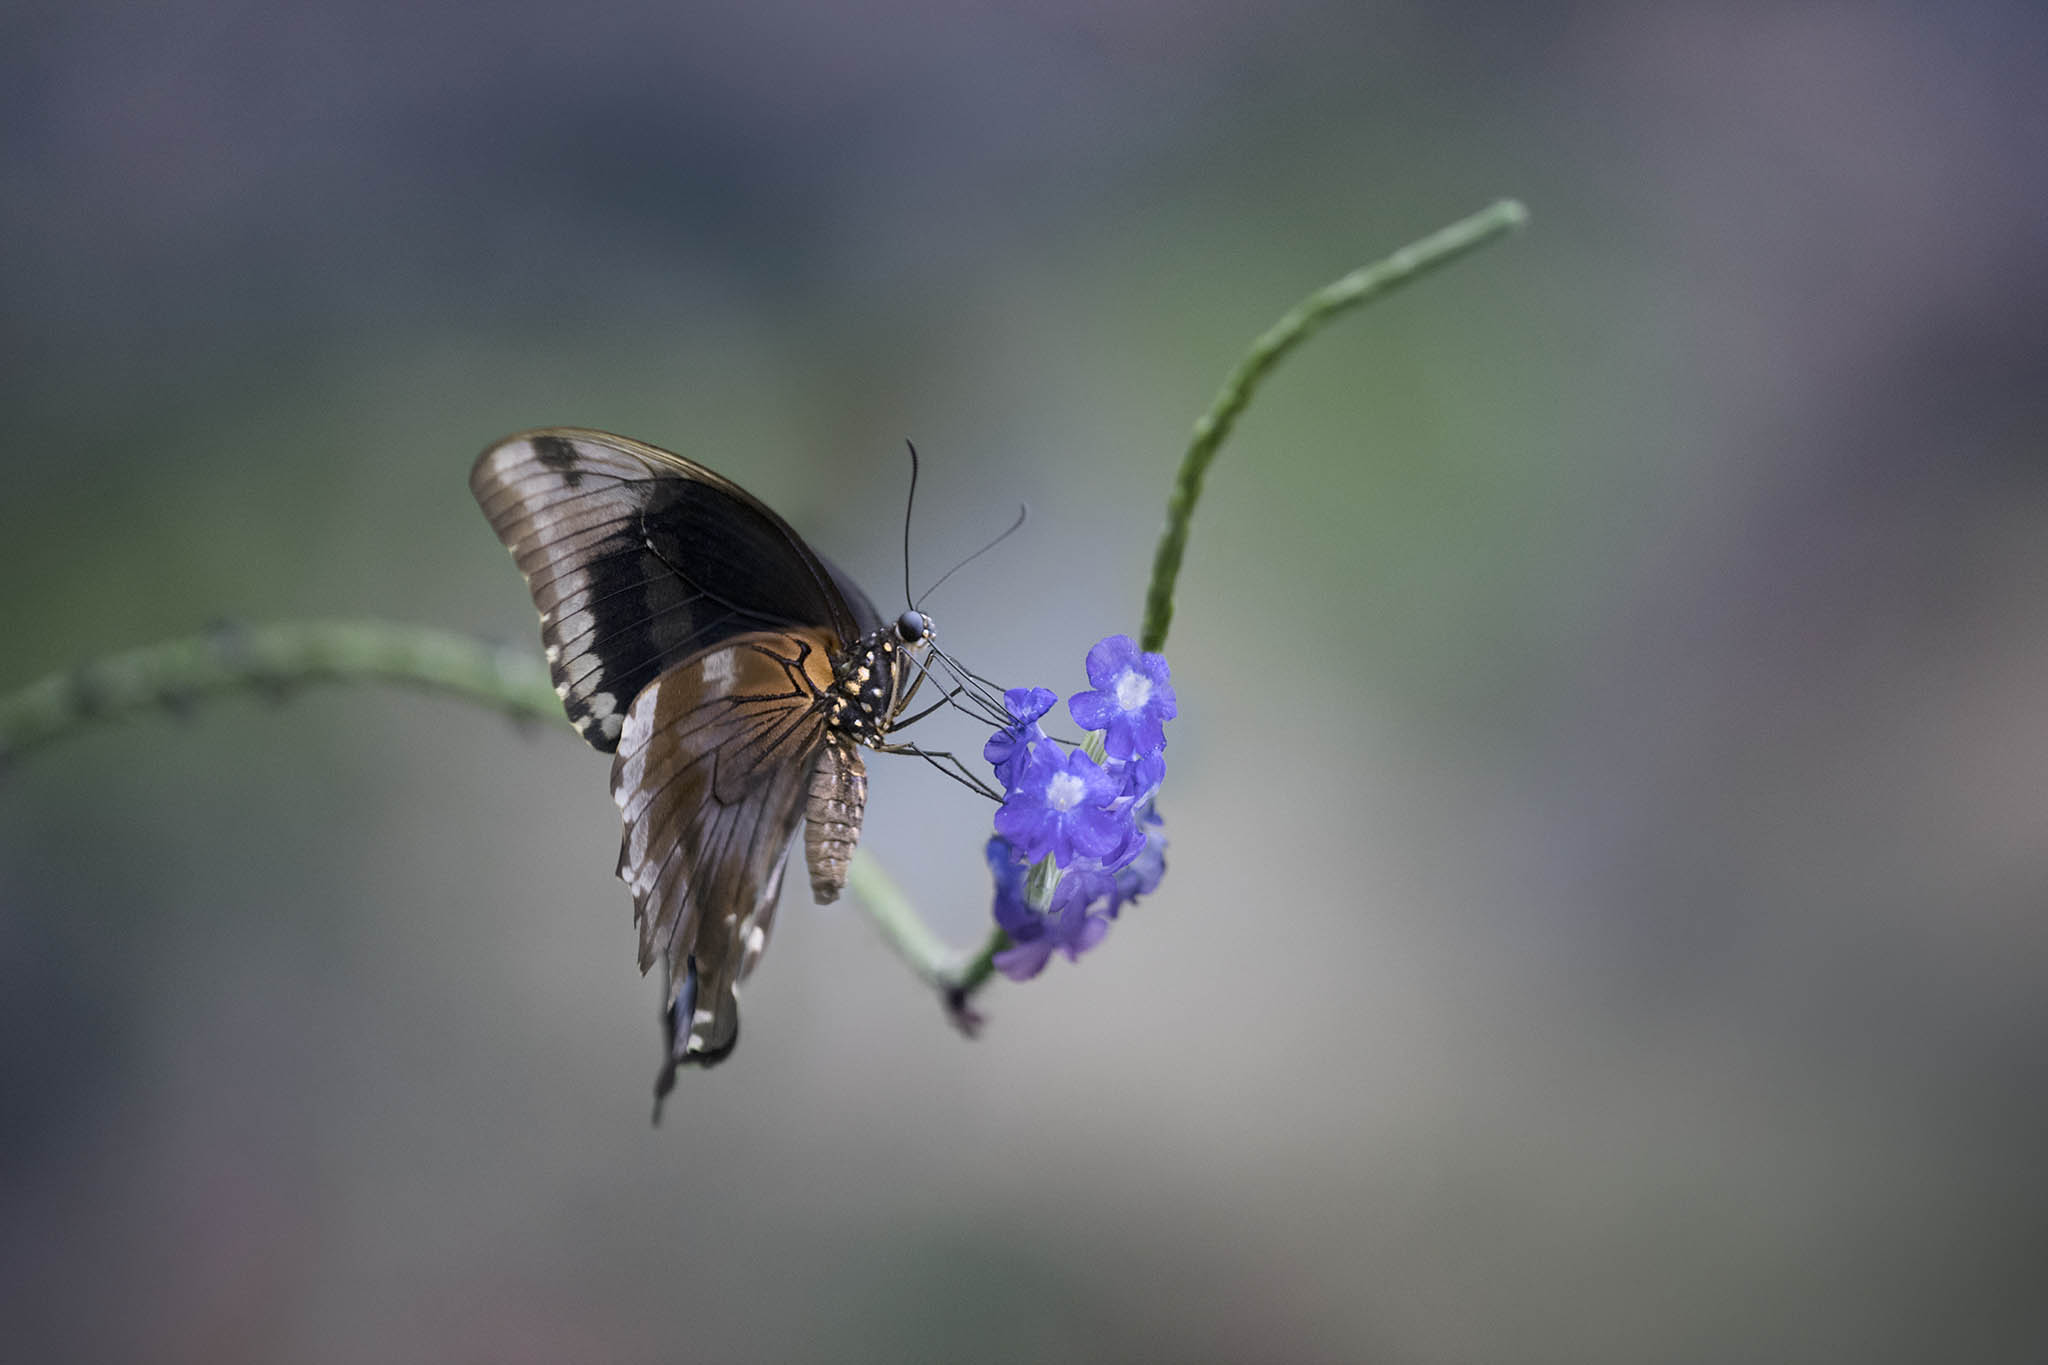 Black and Brown Butterfly on Purple Flower